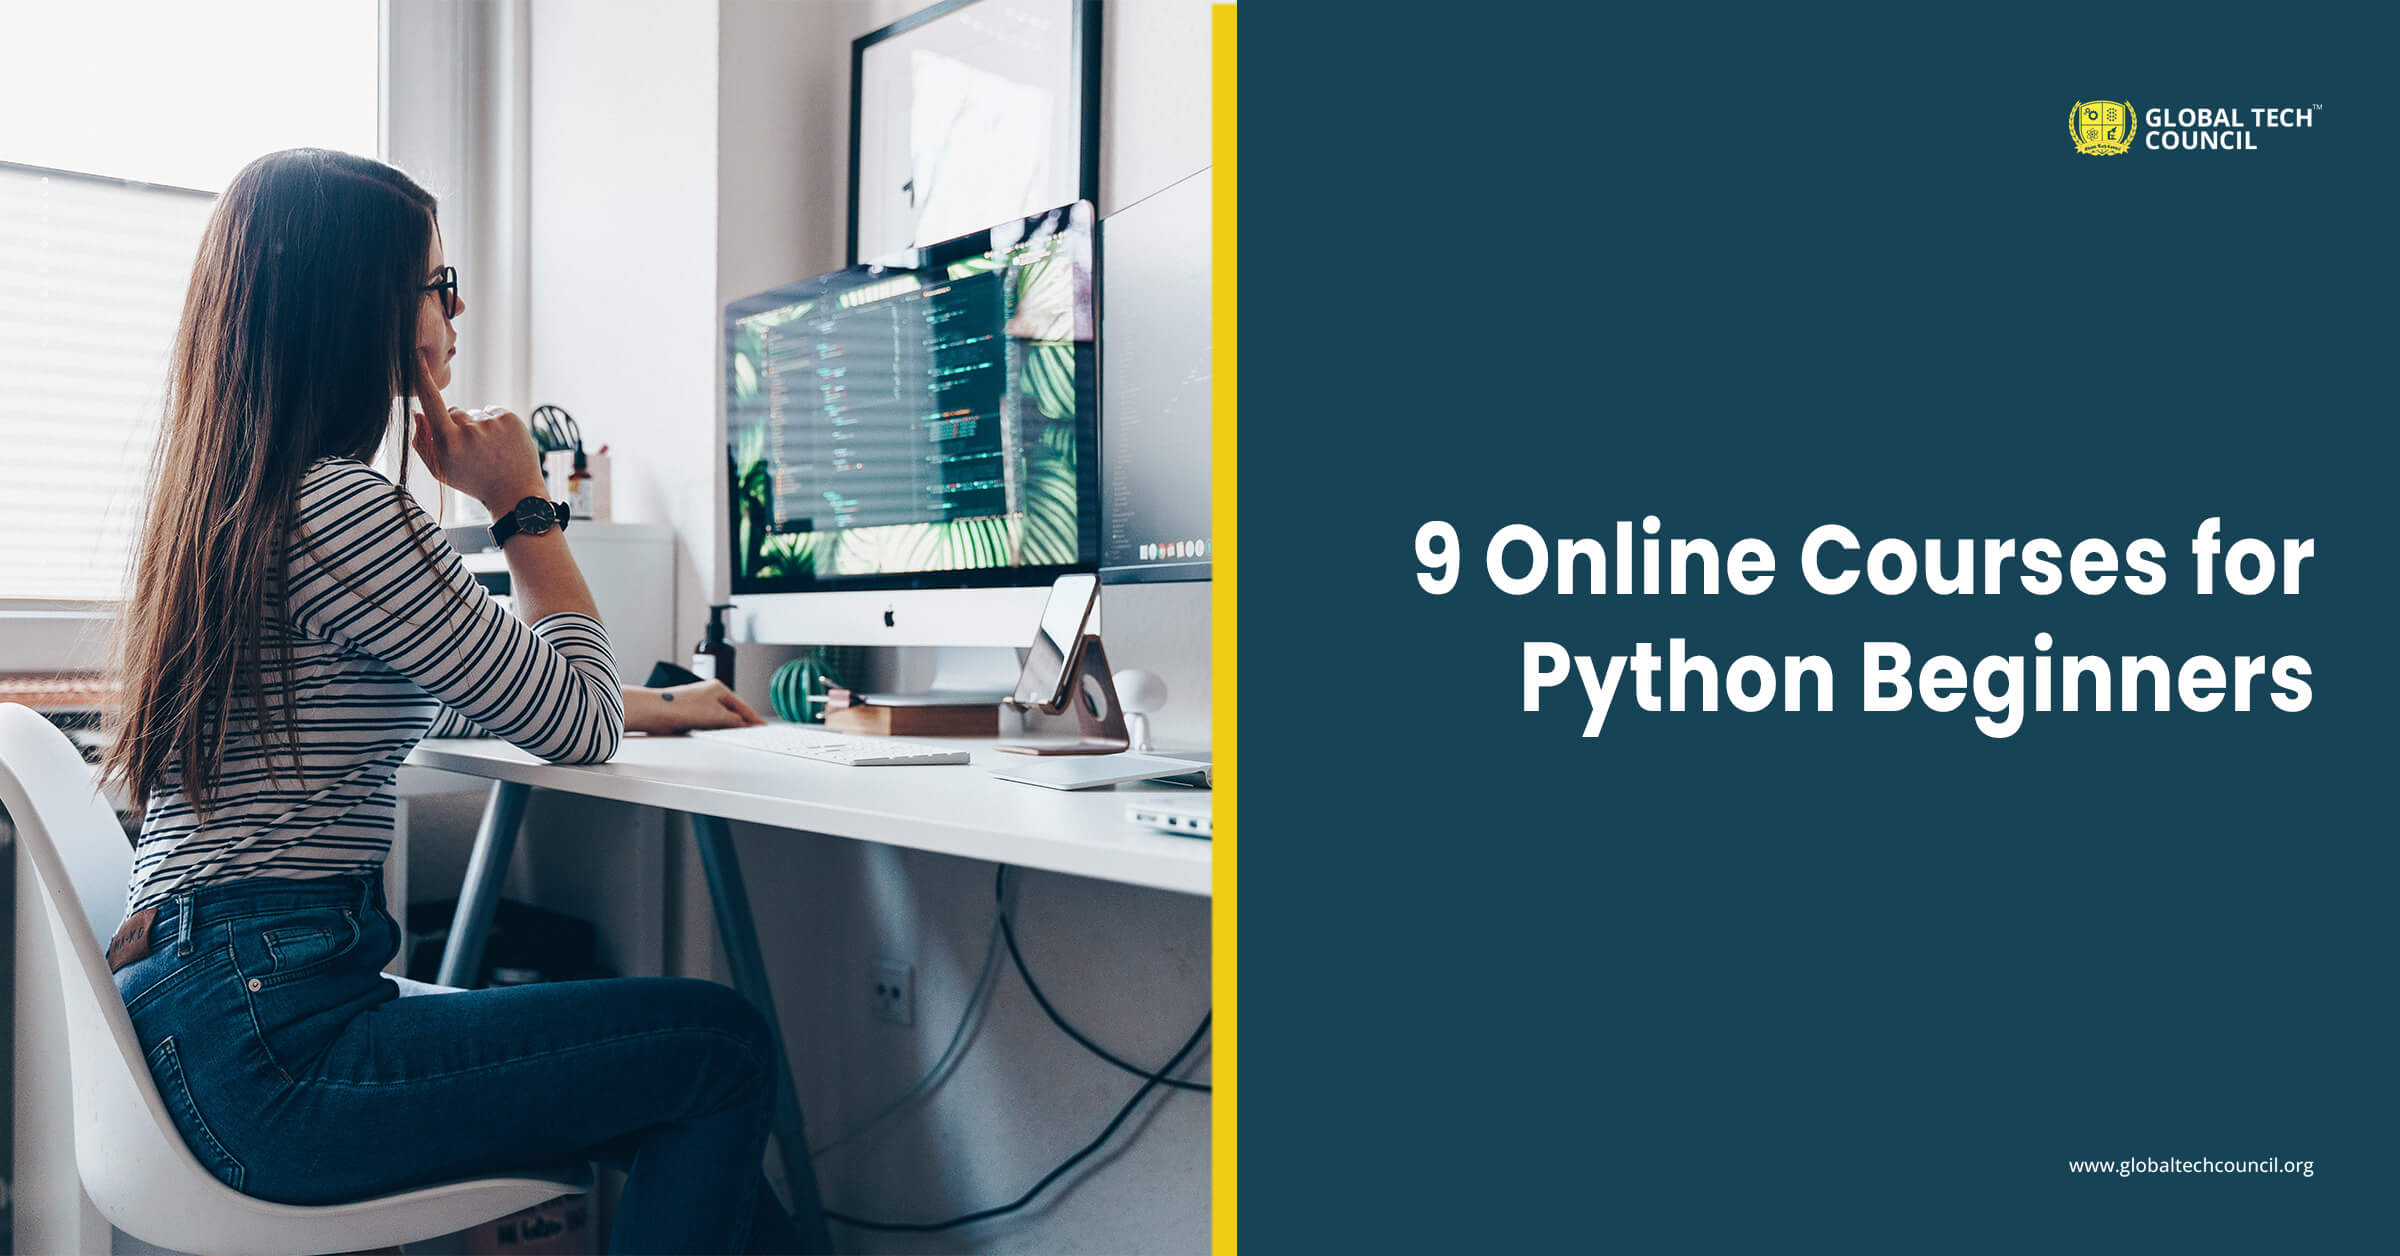 Python for Beginners: Learn How to Write a Program in Python